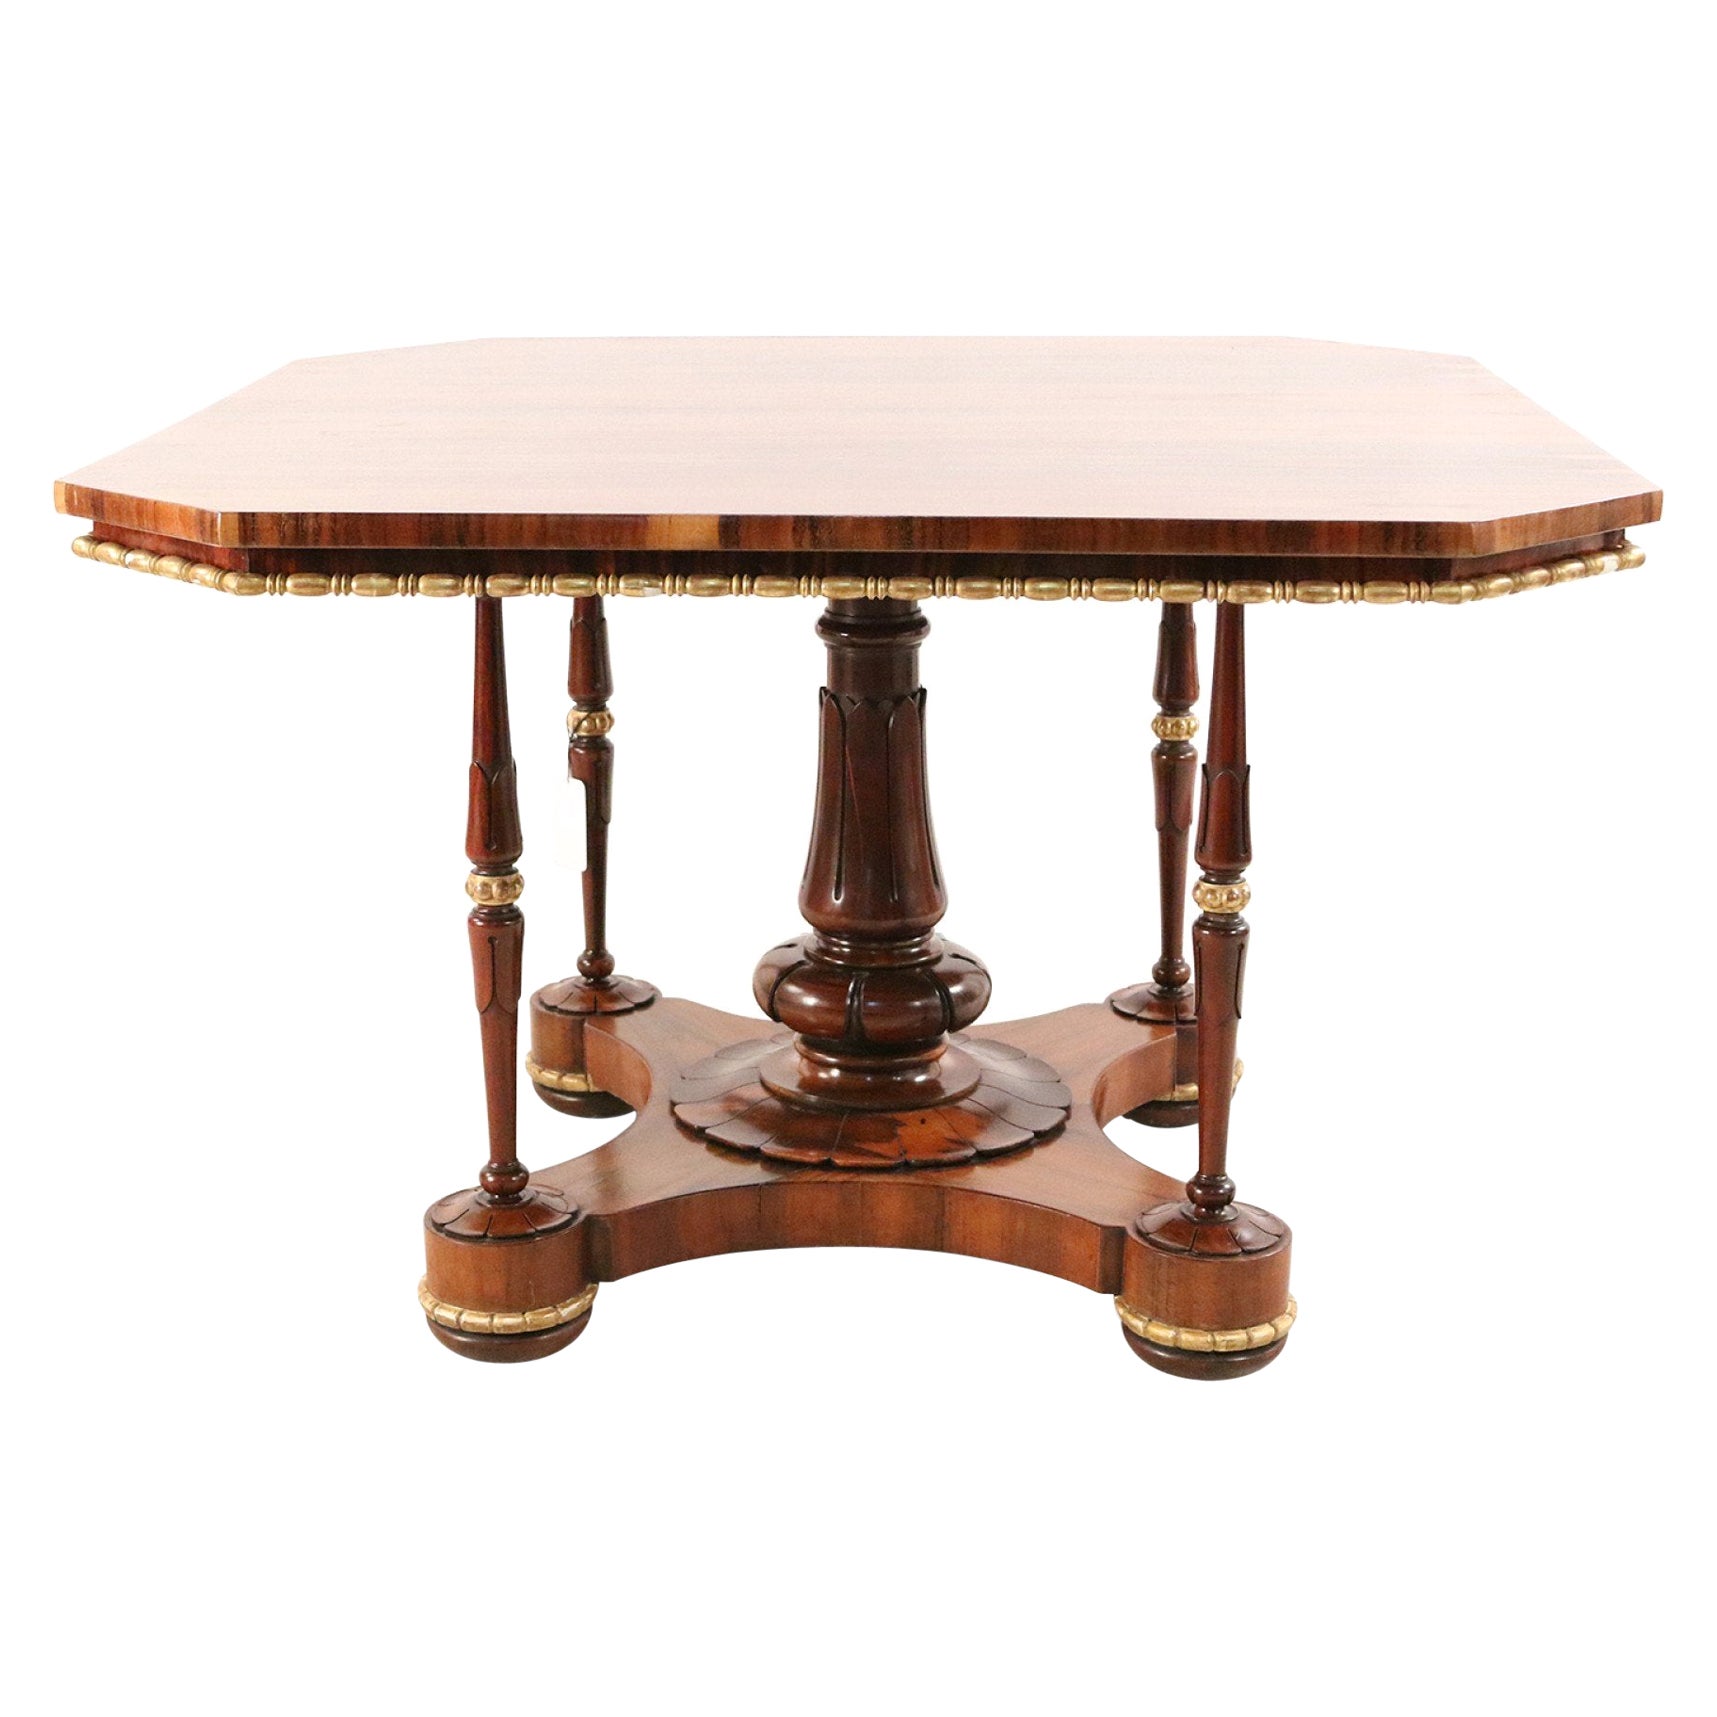 English Regency Square Canted Corner Walnut and Brass Trim Center Table For Sale